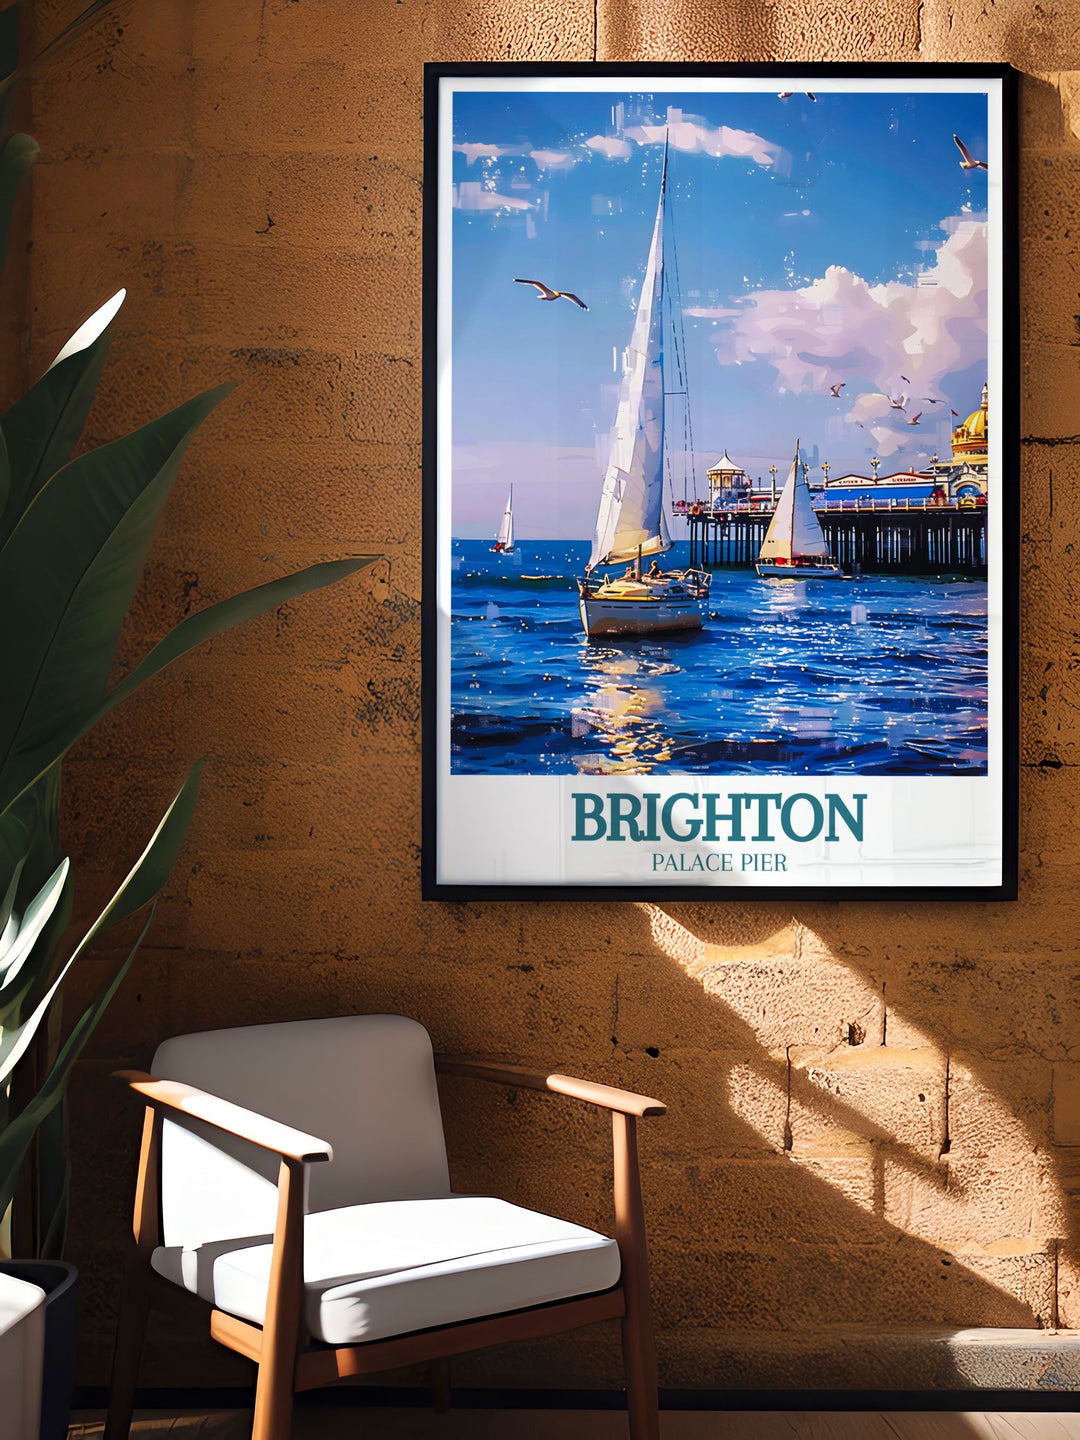 Brighton Palace Pier framed print highlighting the pier and the picturesque English Channel, a must have vintage travel print for those who love coastal scenes and nostalgic art.